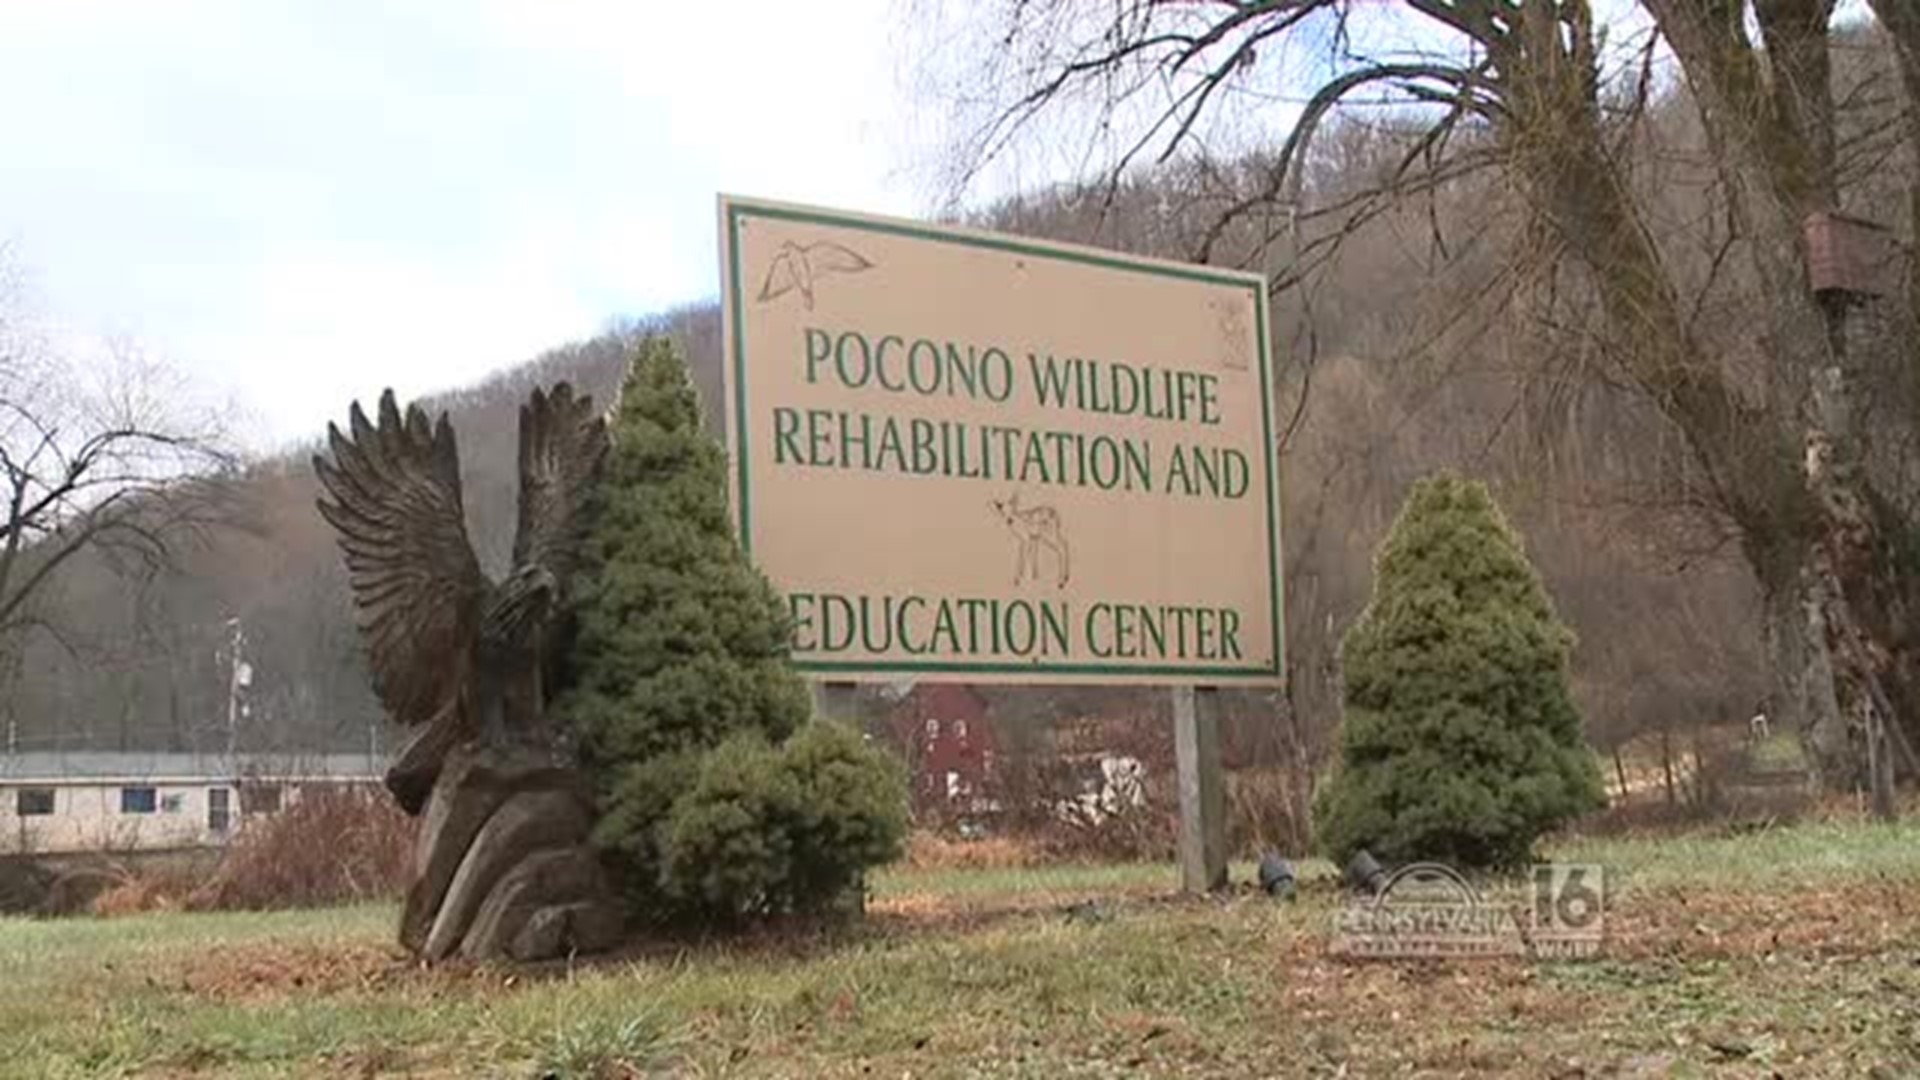 Pocono Wildlife Rehabilitation and Education Center in the Poconos is asking for donations after an unexpected septic problem popped up on the property.